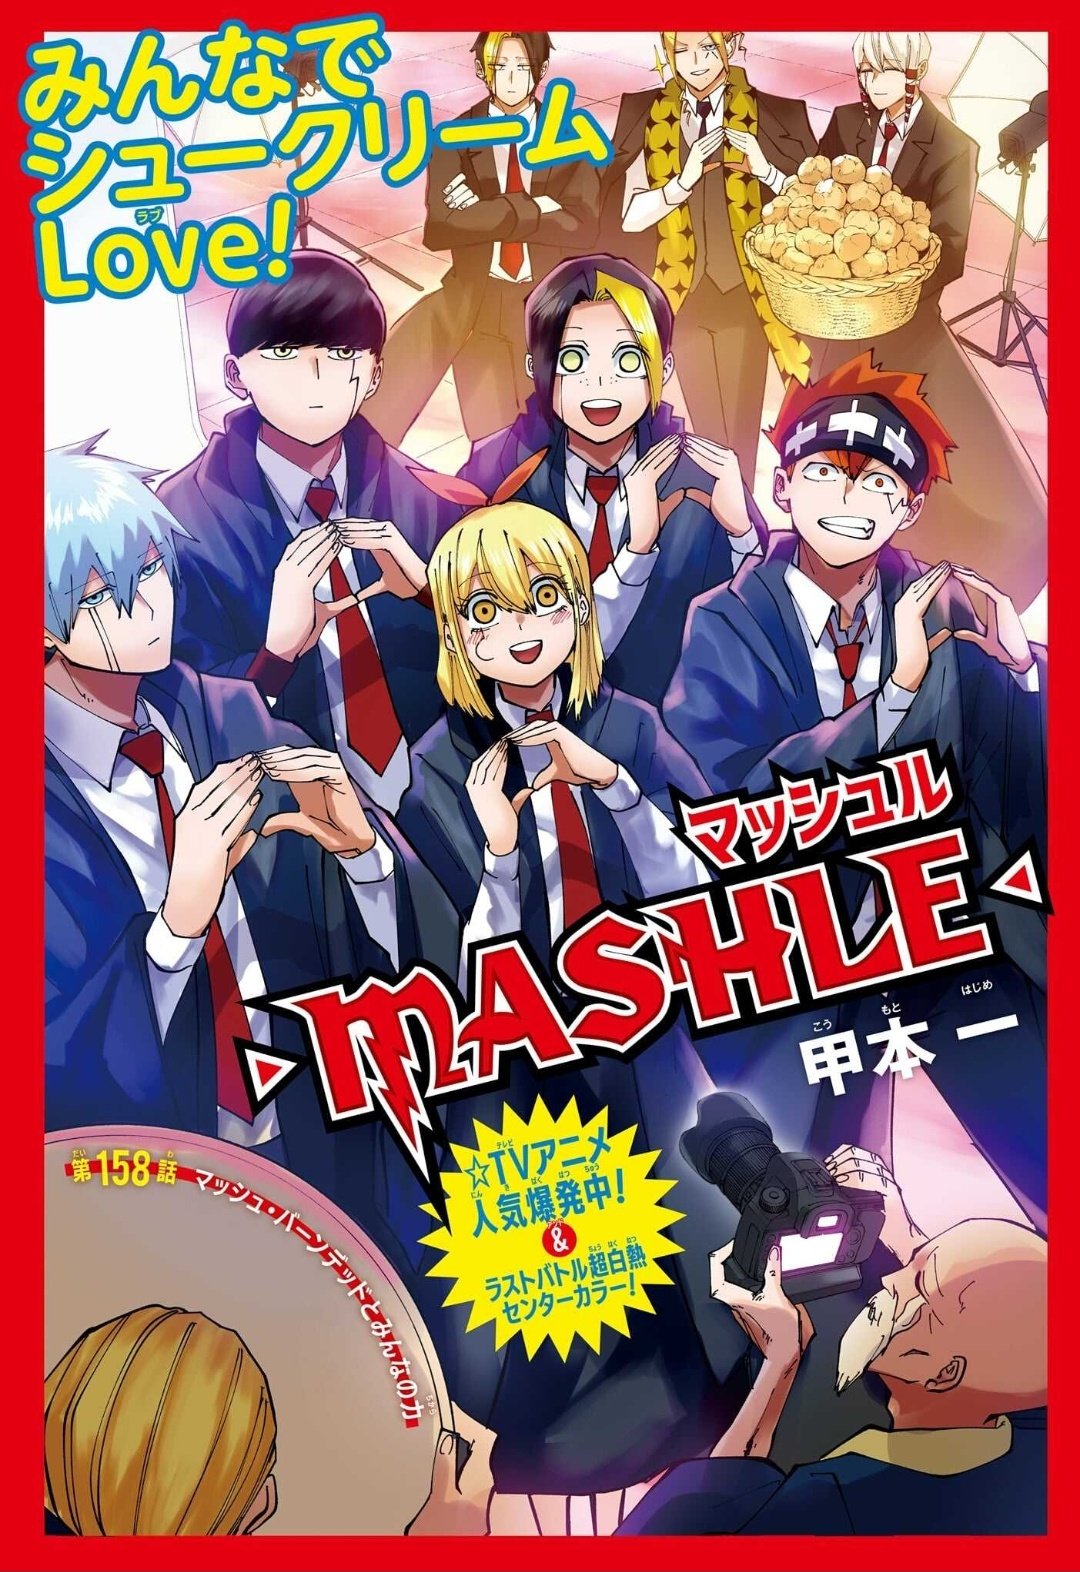 Mashle: Magic and Muscles chapter 158 - Release date and time